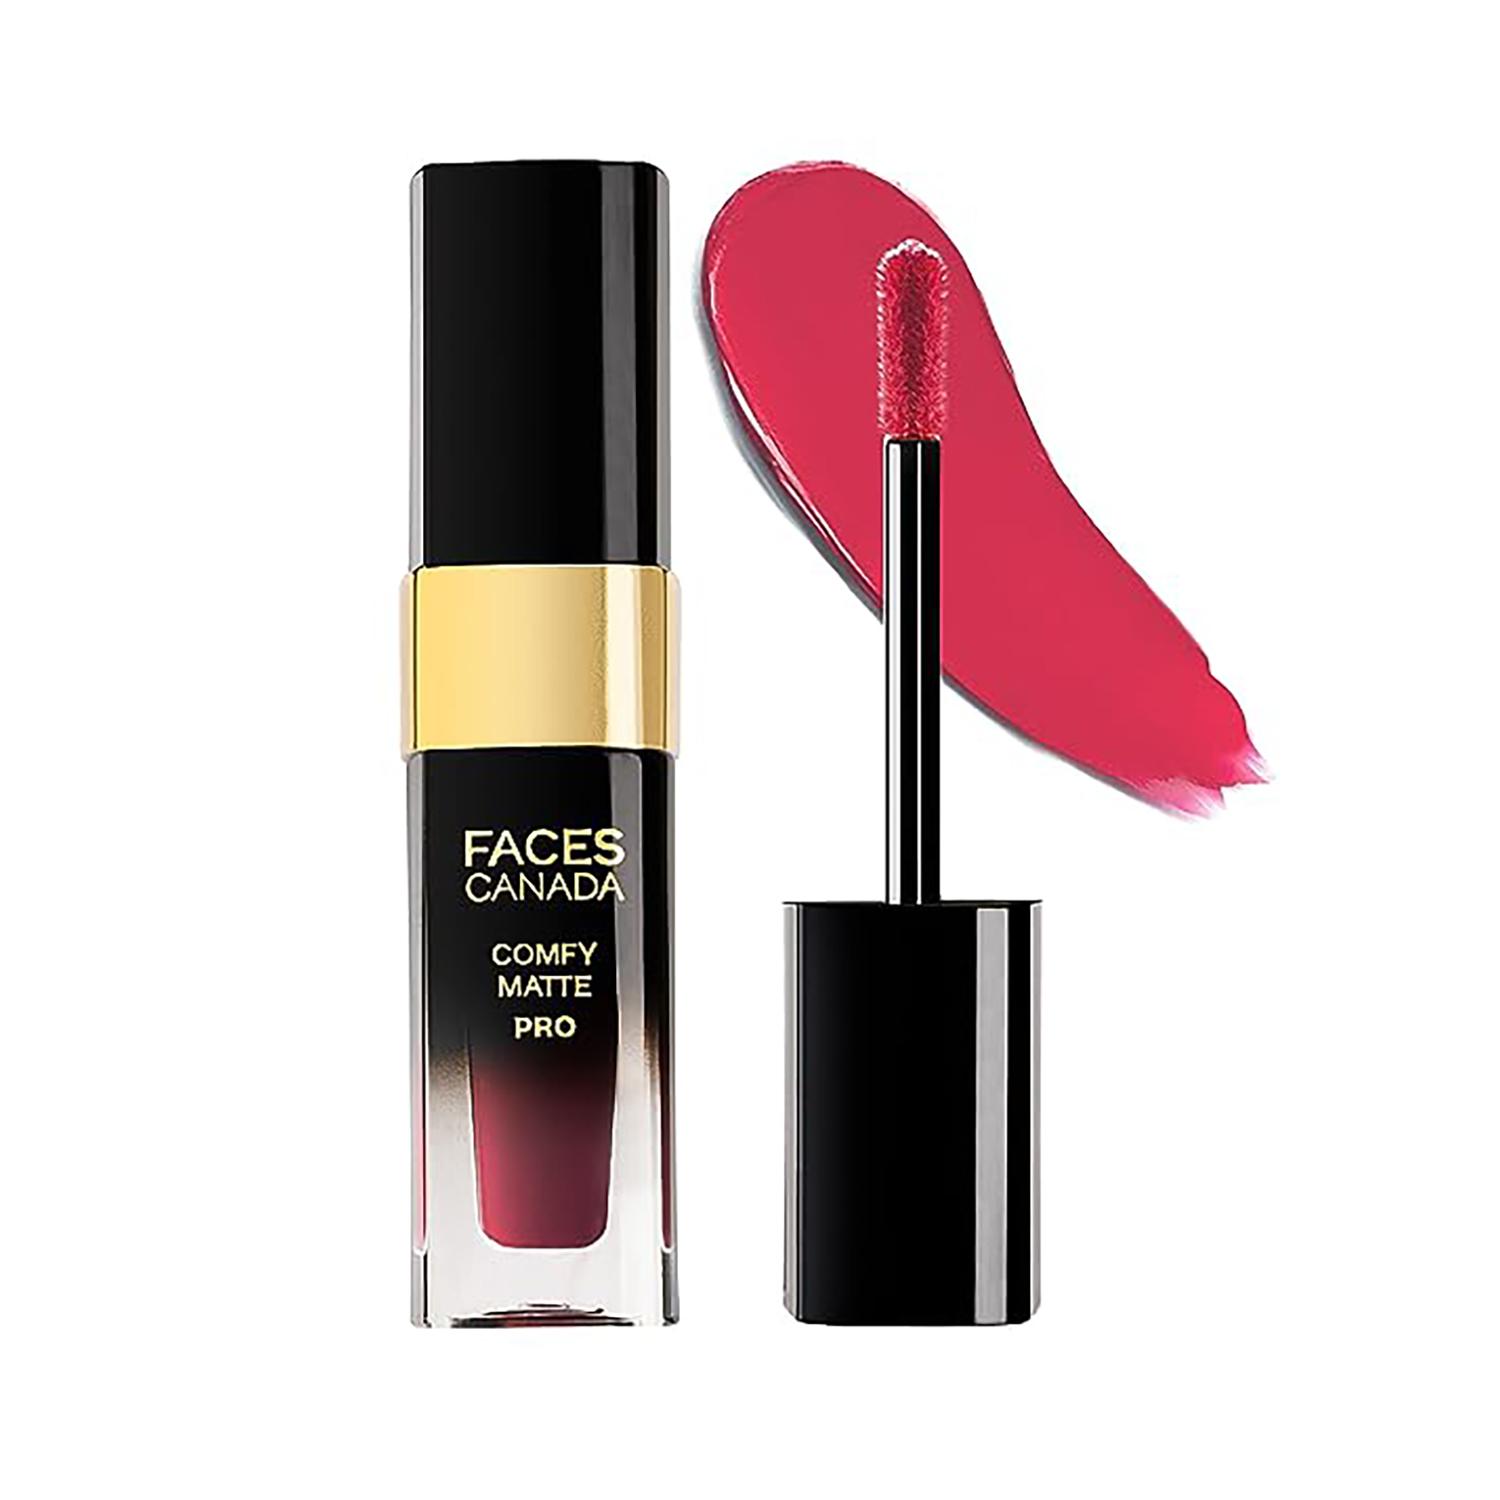 Faces Canada | Faces Canada Comfy Matte Pro Liquid Lipstick - Crafty Pink 05, 10HR Stay, No Dryness (5.5 ml)